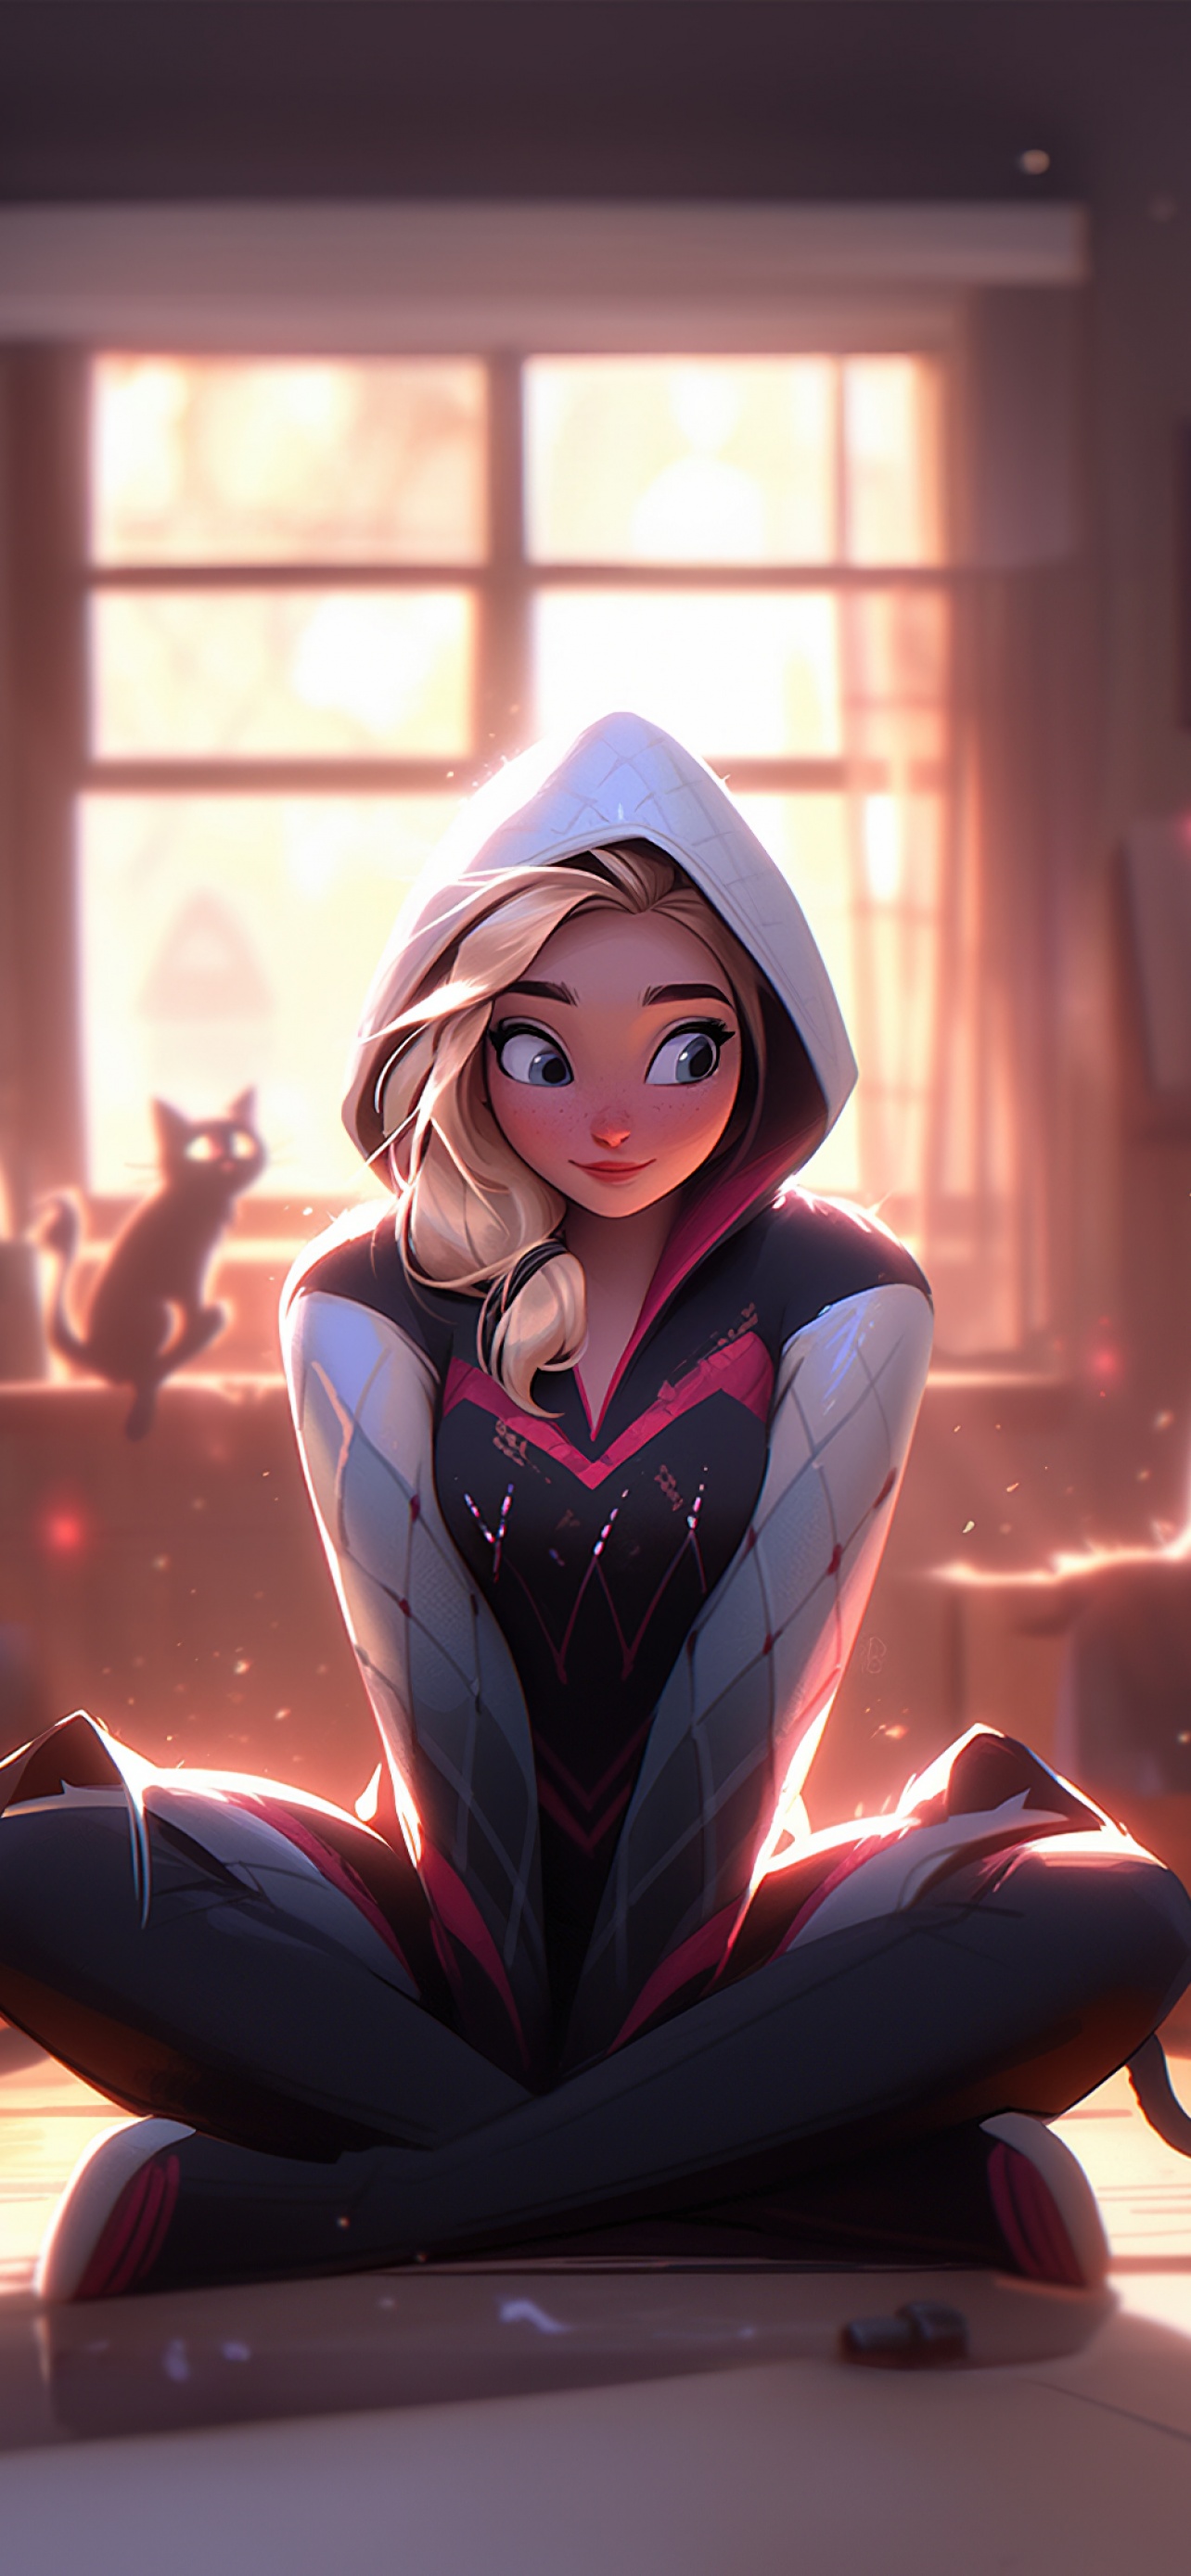 Top 999+ Spider Gwen Wallpaper Full HD, 4K✓Free to Use